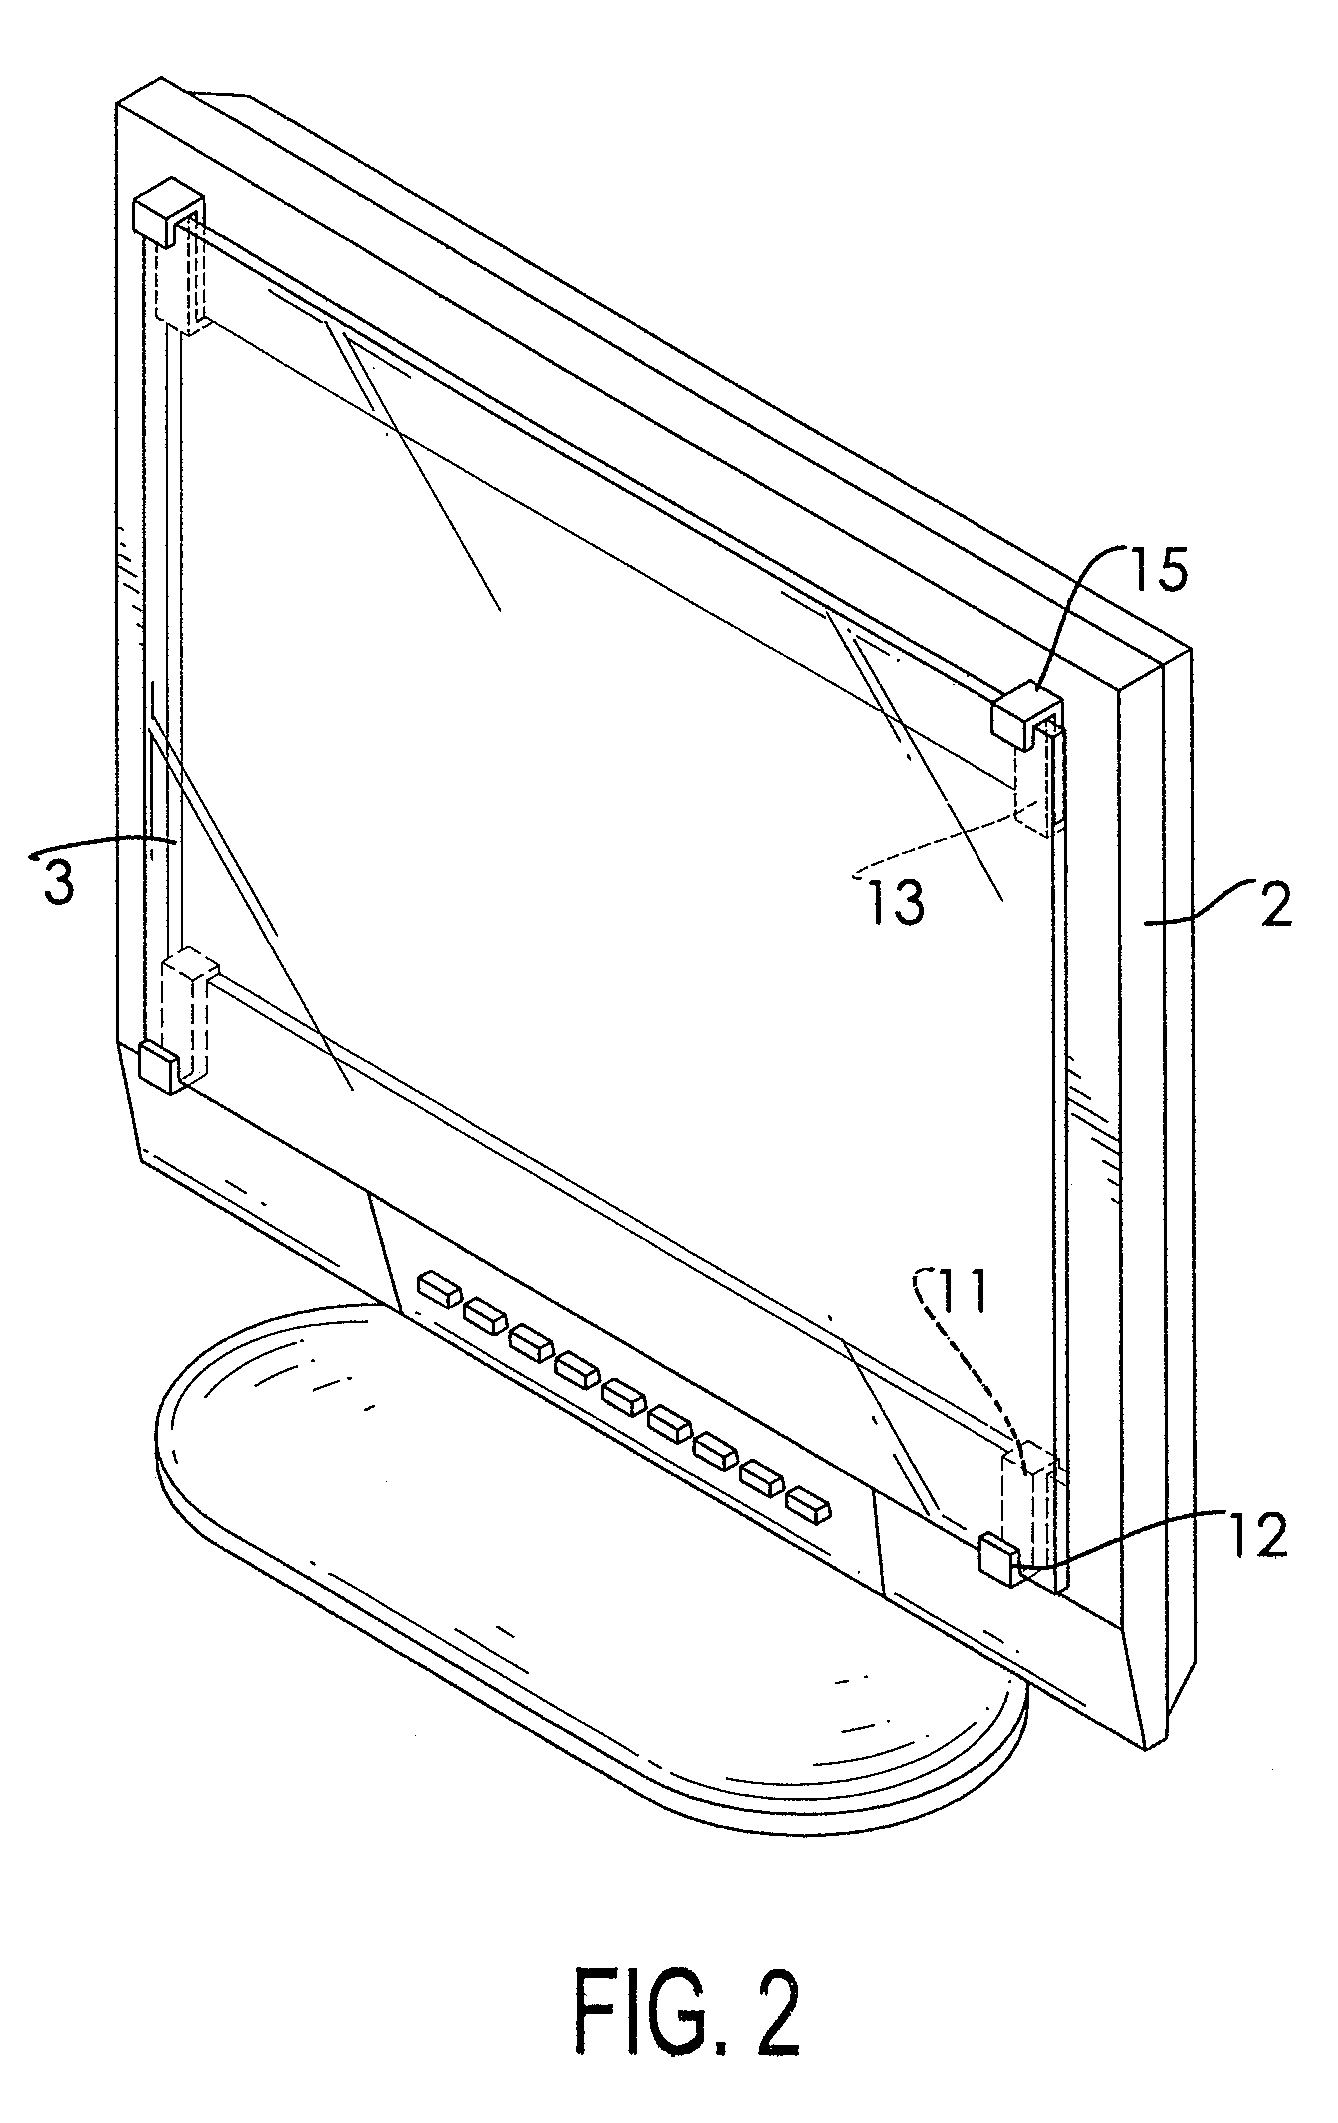 Detachable screen protector assembly with a fastening apparatus